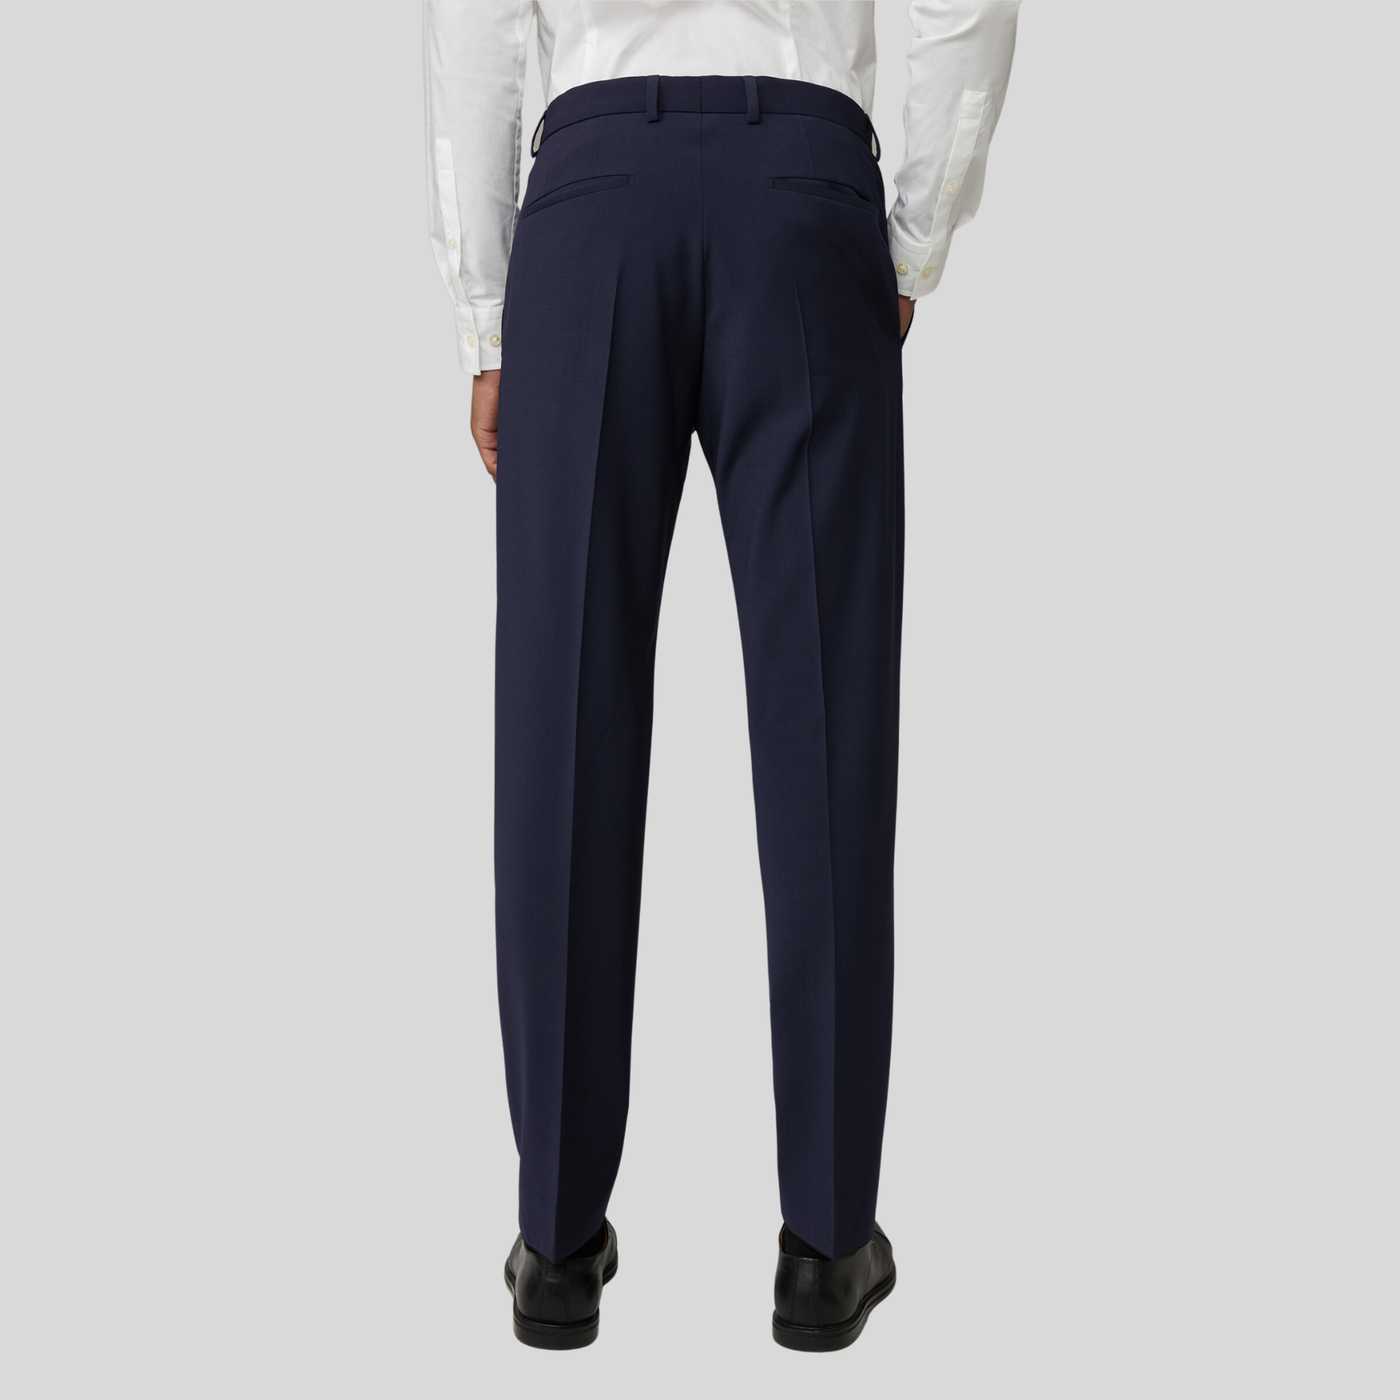 Gotstyle Fashion - Strellson Suits Wool Stretch Blend Slim Fit Dress Pant - Navy